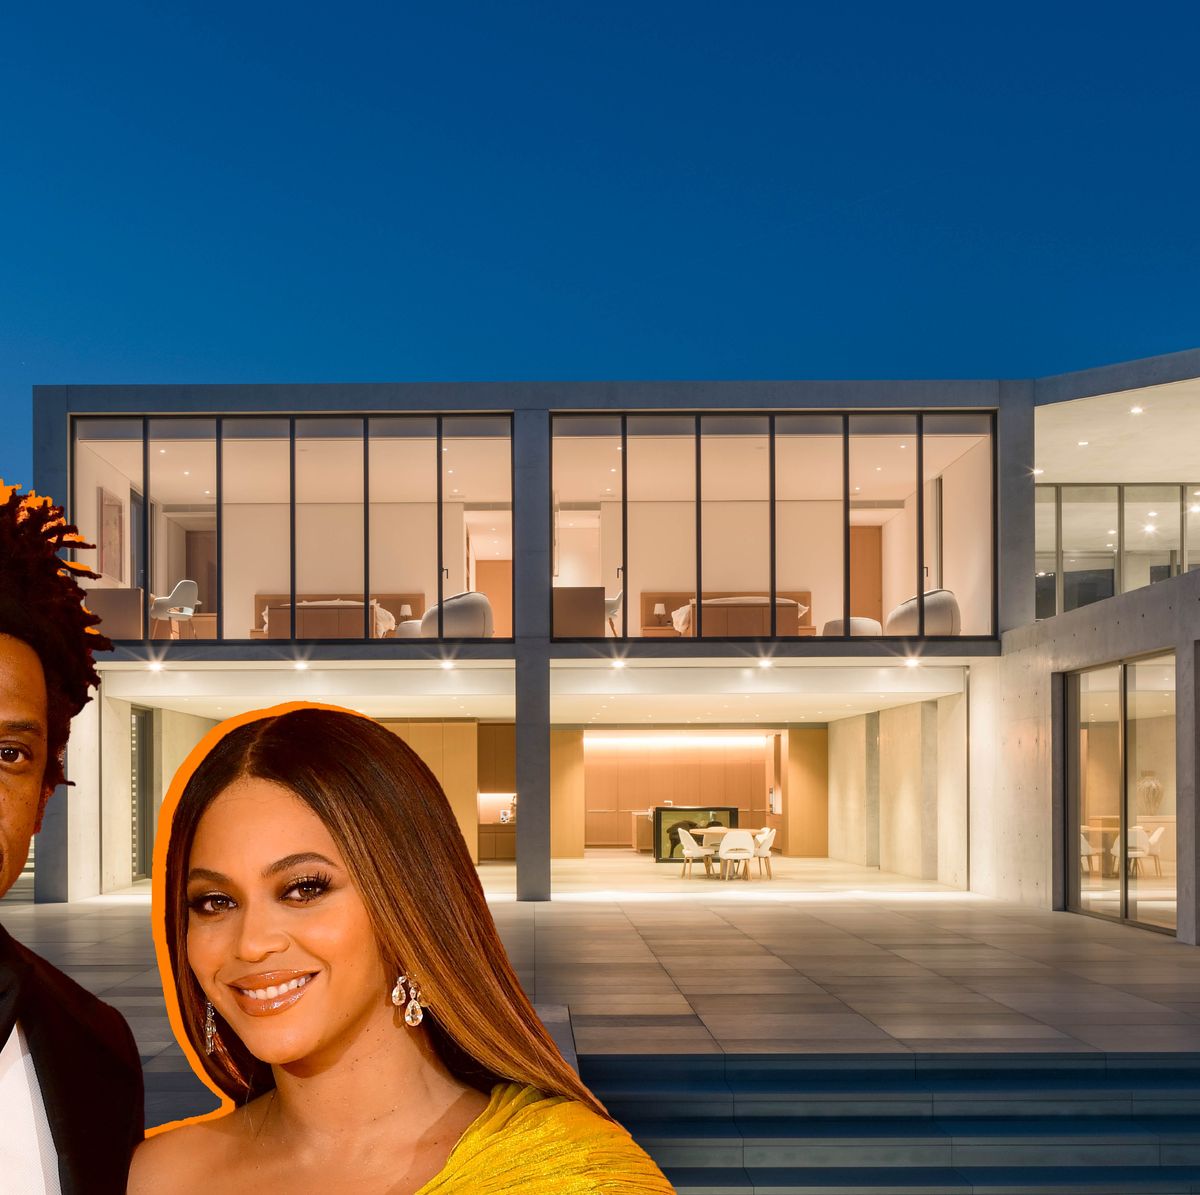 Beyonce and Jay-Z purchase the most expensive home in California for $200  million